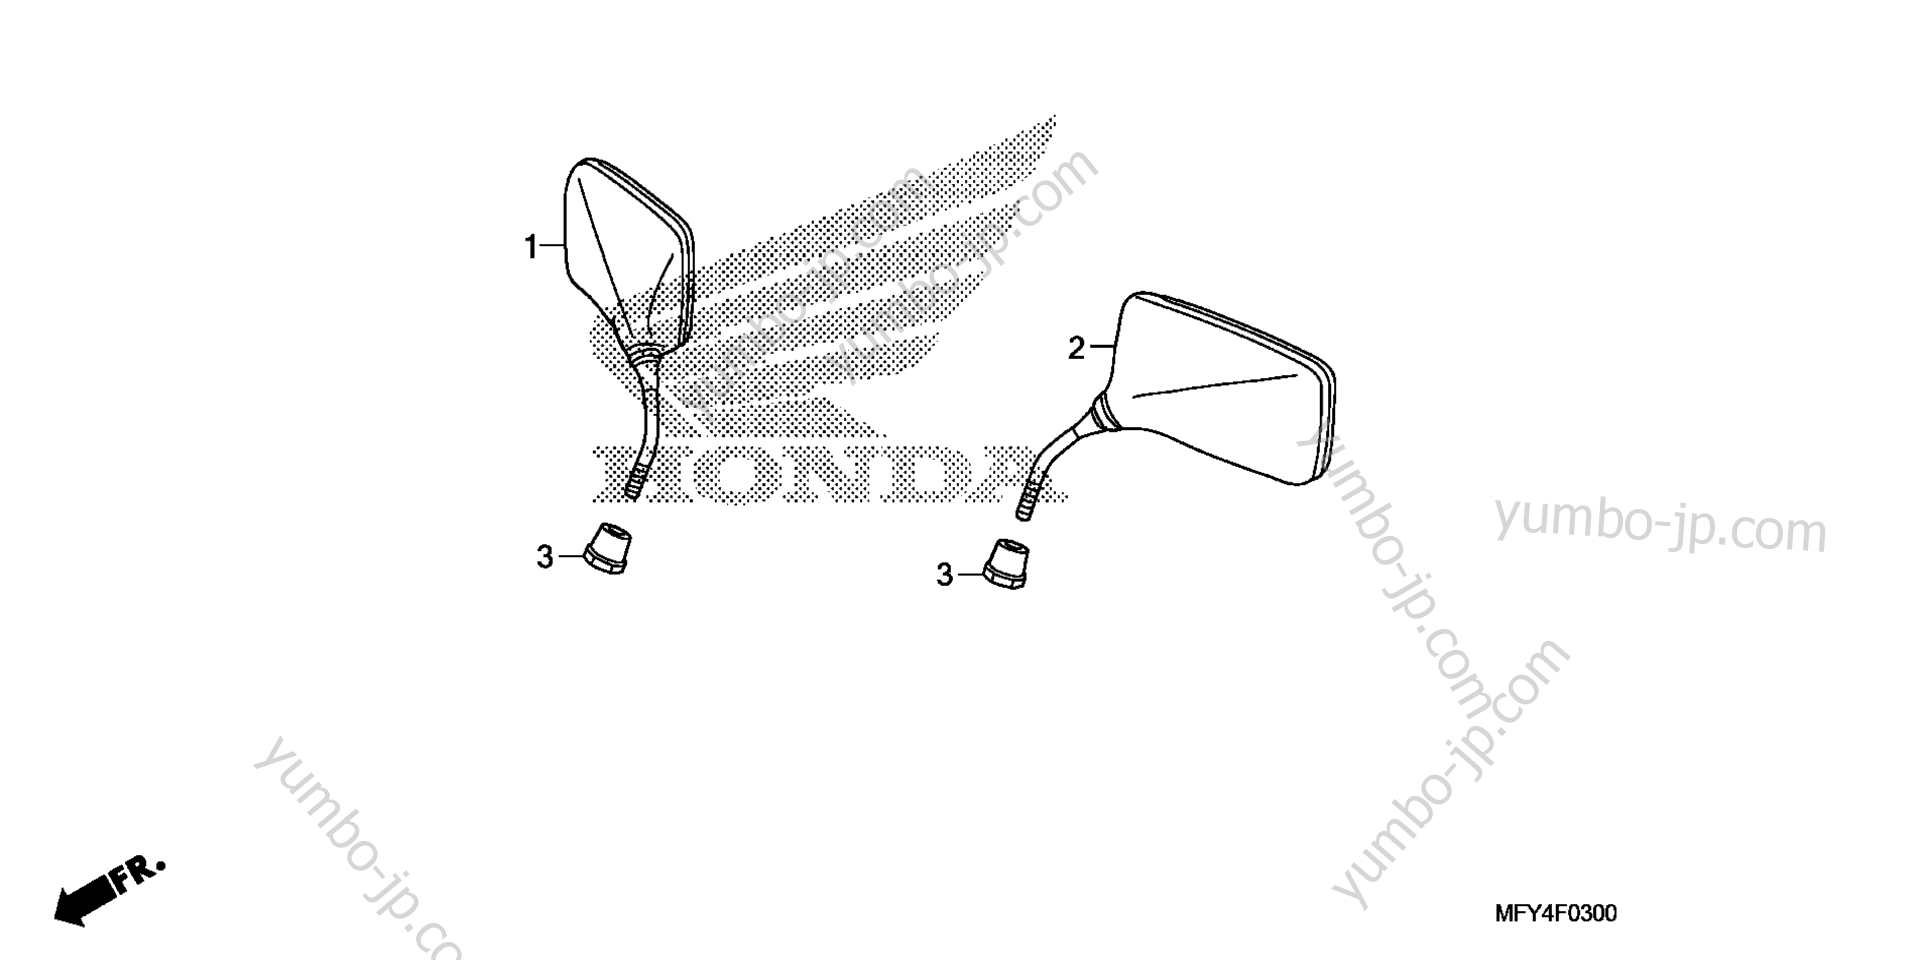 MIRROR for motorcycles HONDA VT1300CT A 2011 year